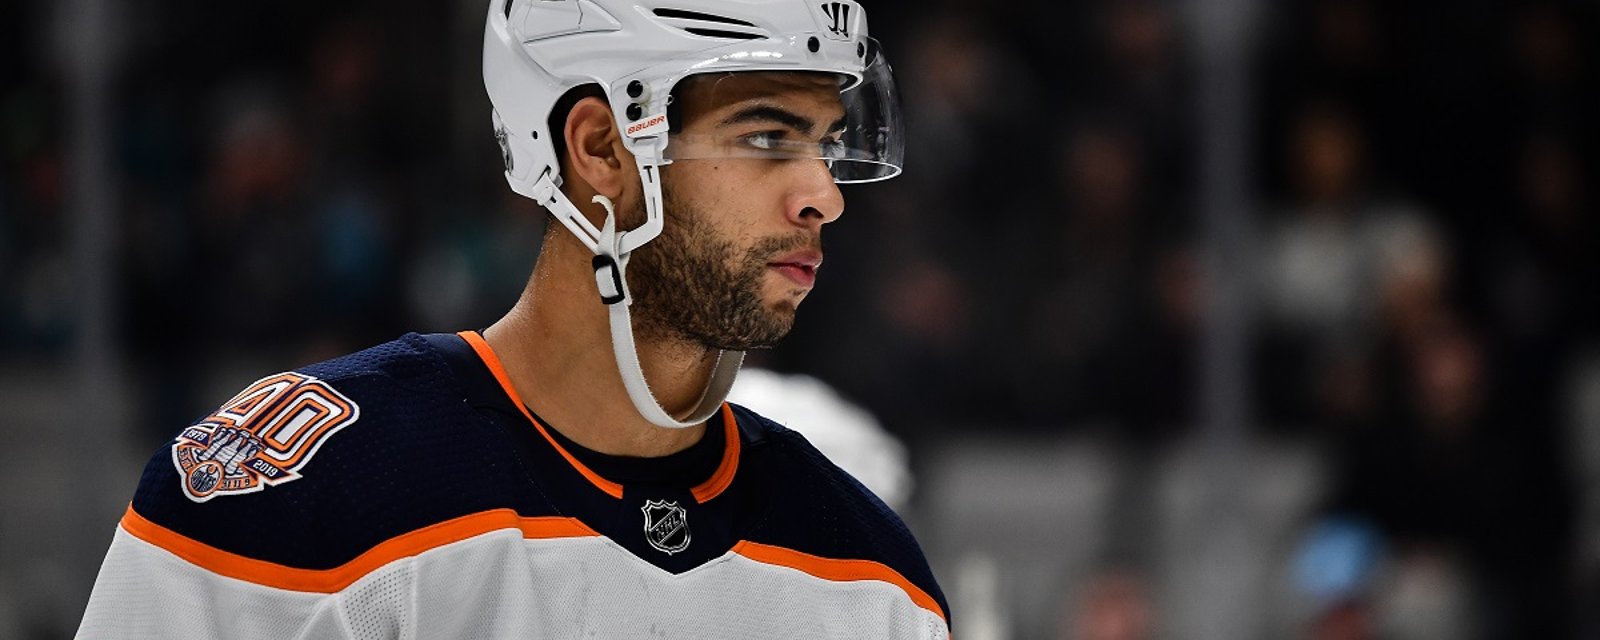 Darnell Nurse responds to late game cheap shot from Corey Perry.